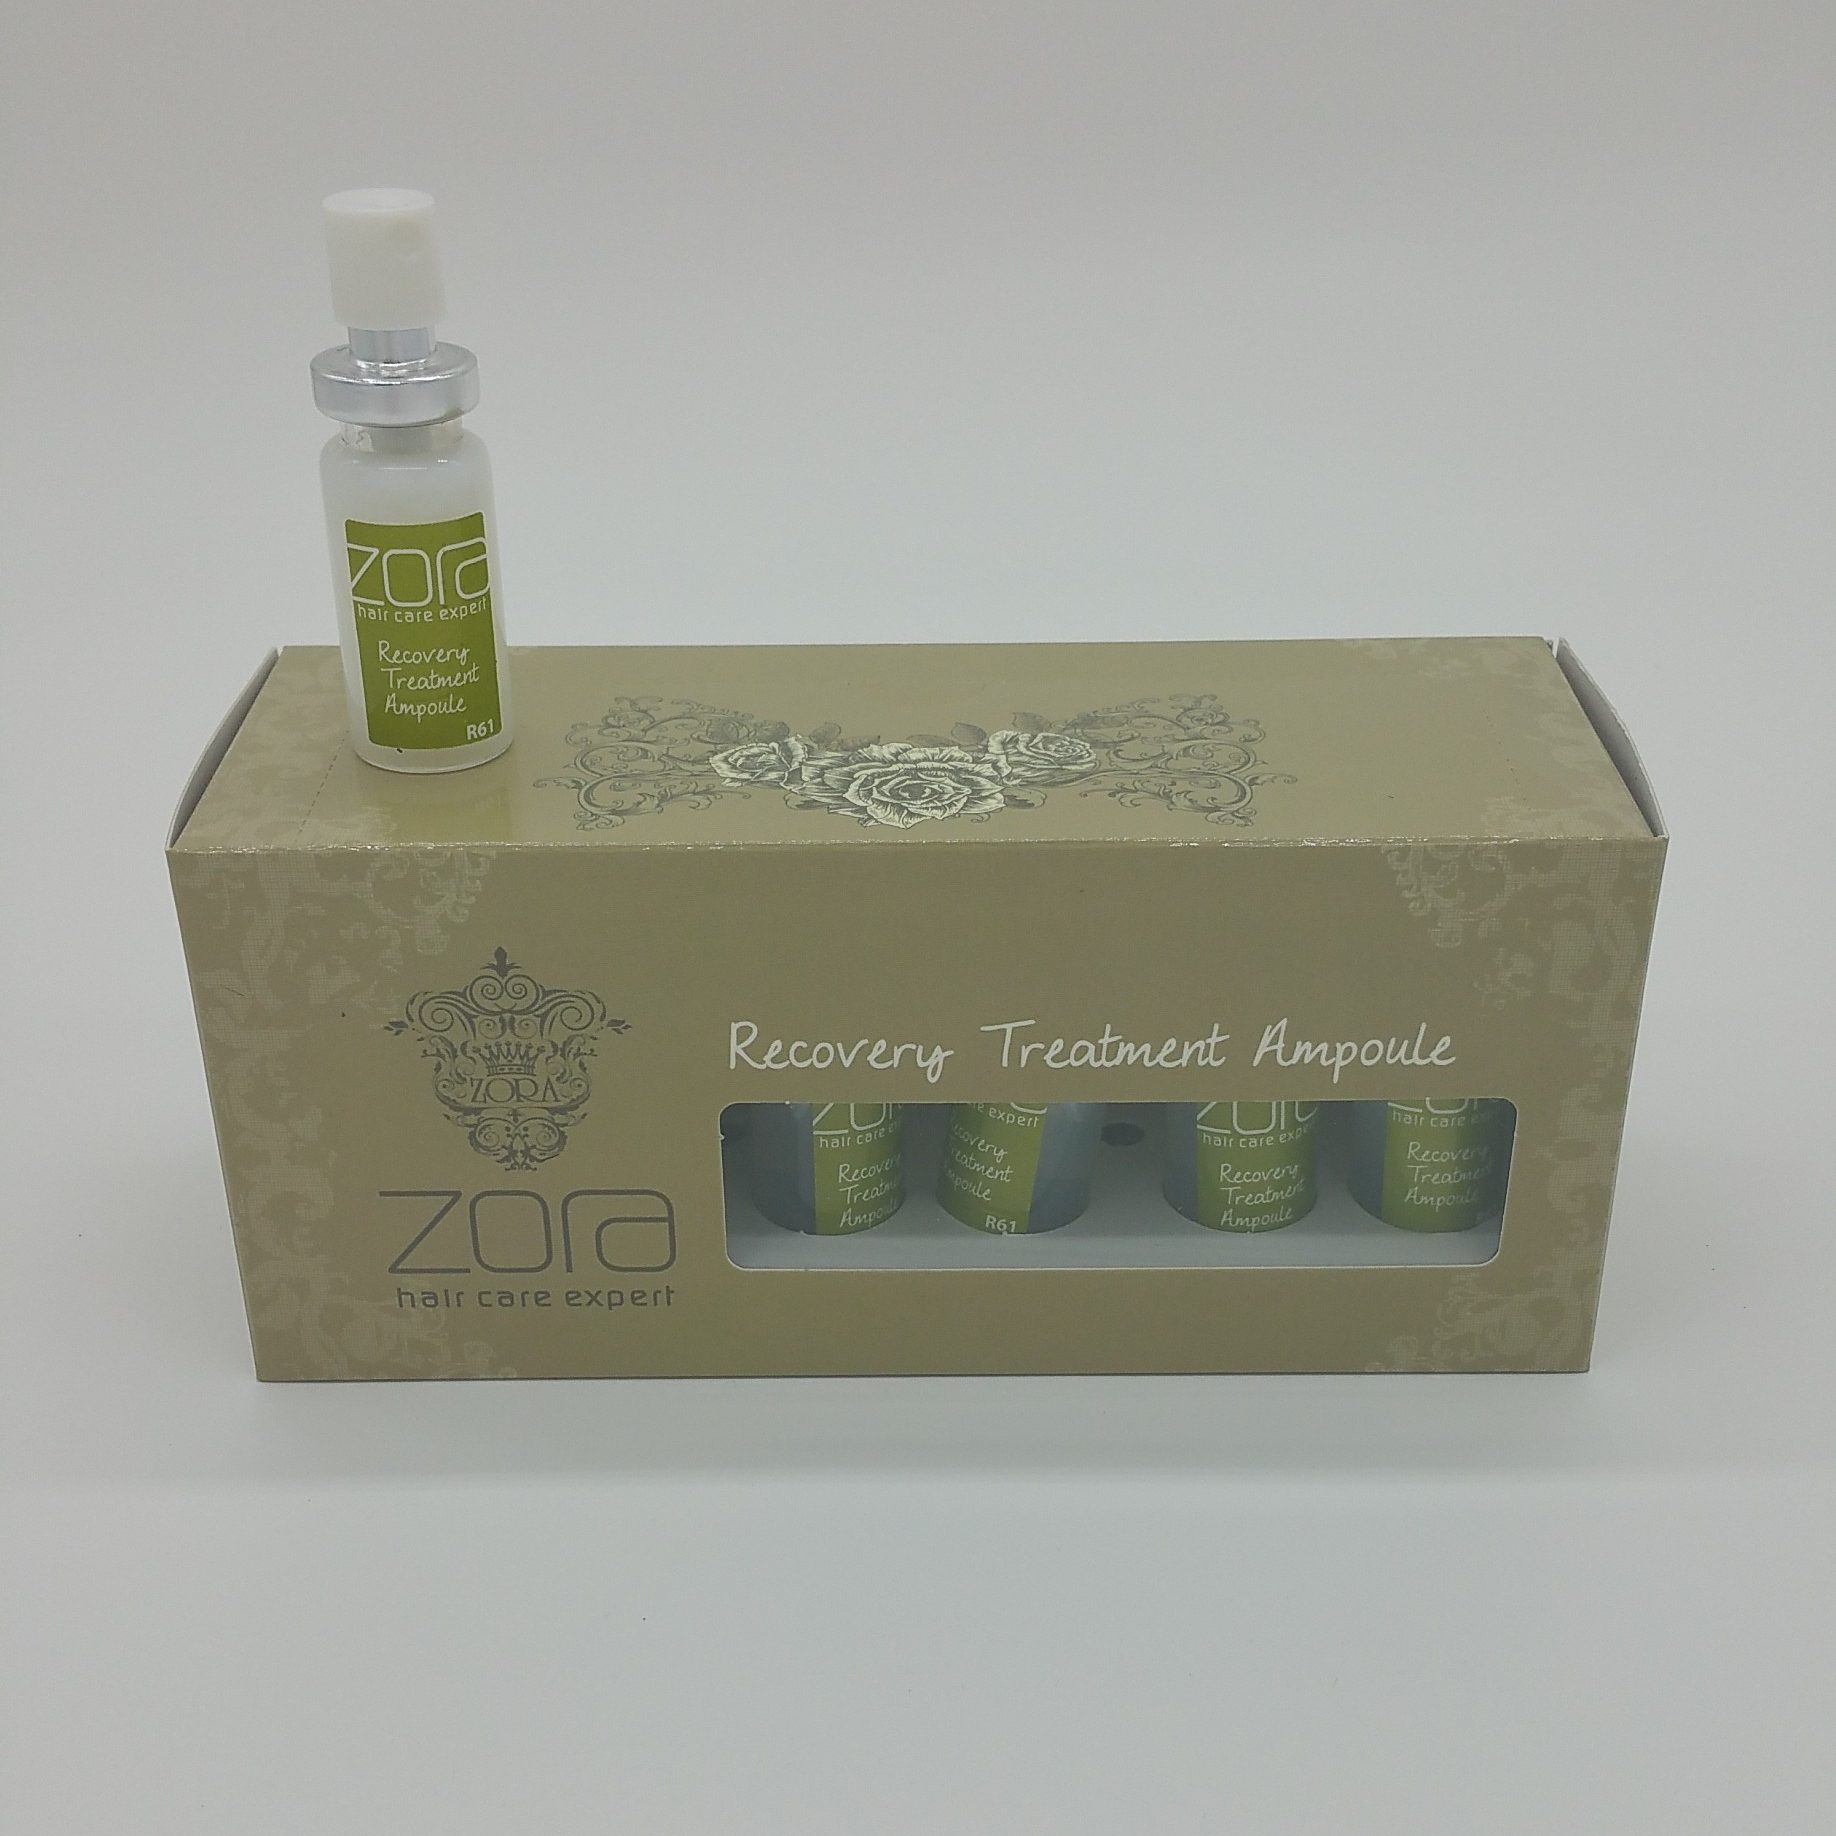 Zora Recovery Treatment Ampoule